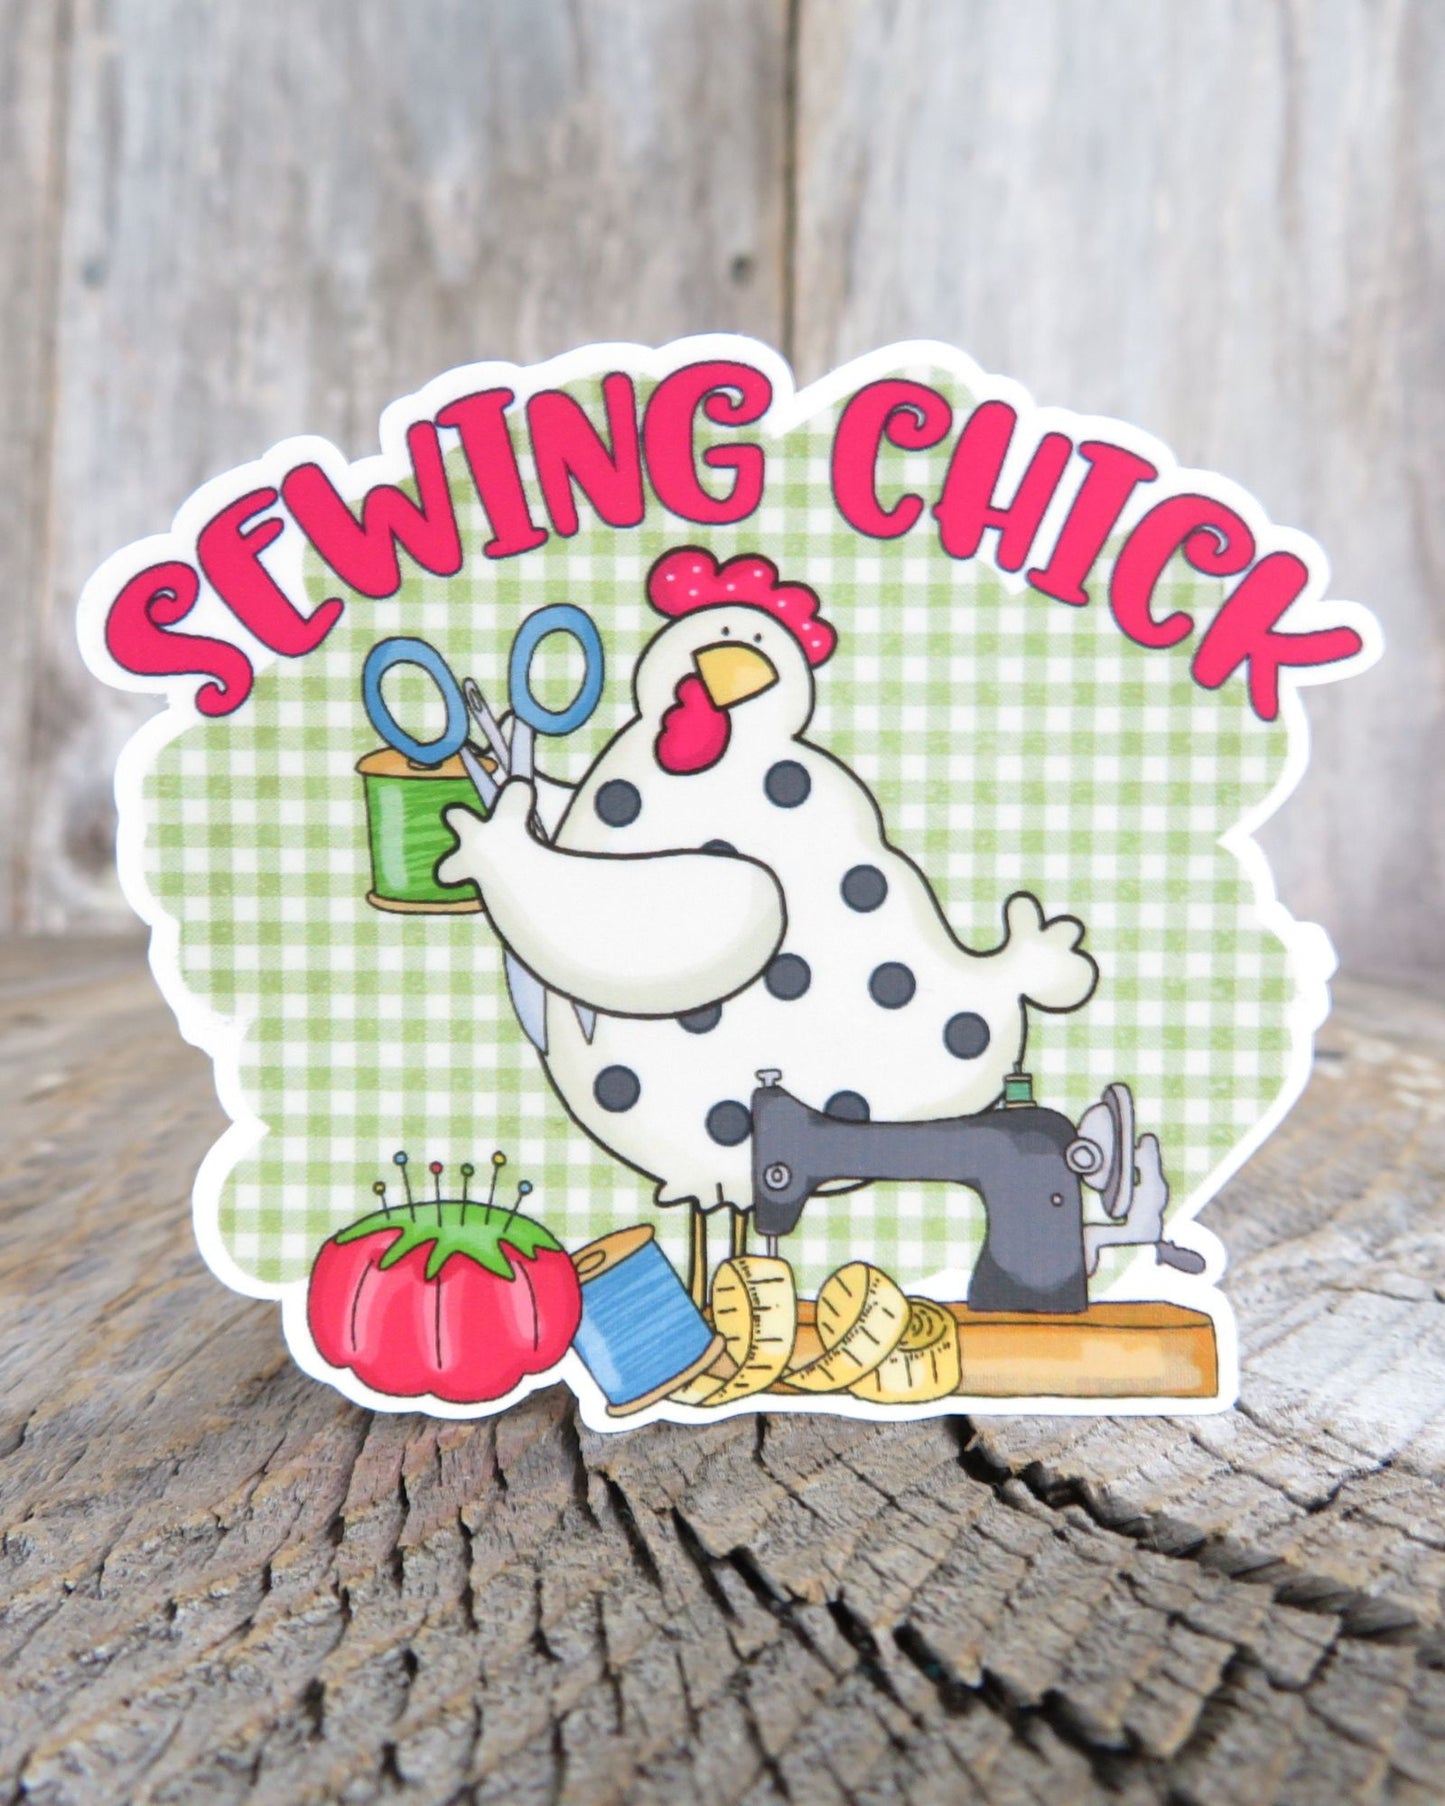 Sewing Chick Sticker Waterproof Chicken Lover Country Style Gingham Full Color Waterproof Quilt Lady Crafty